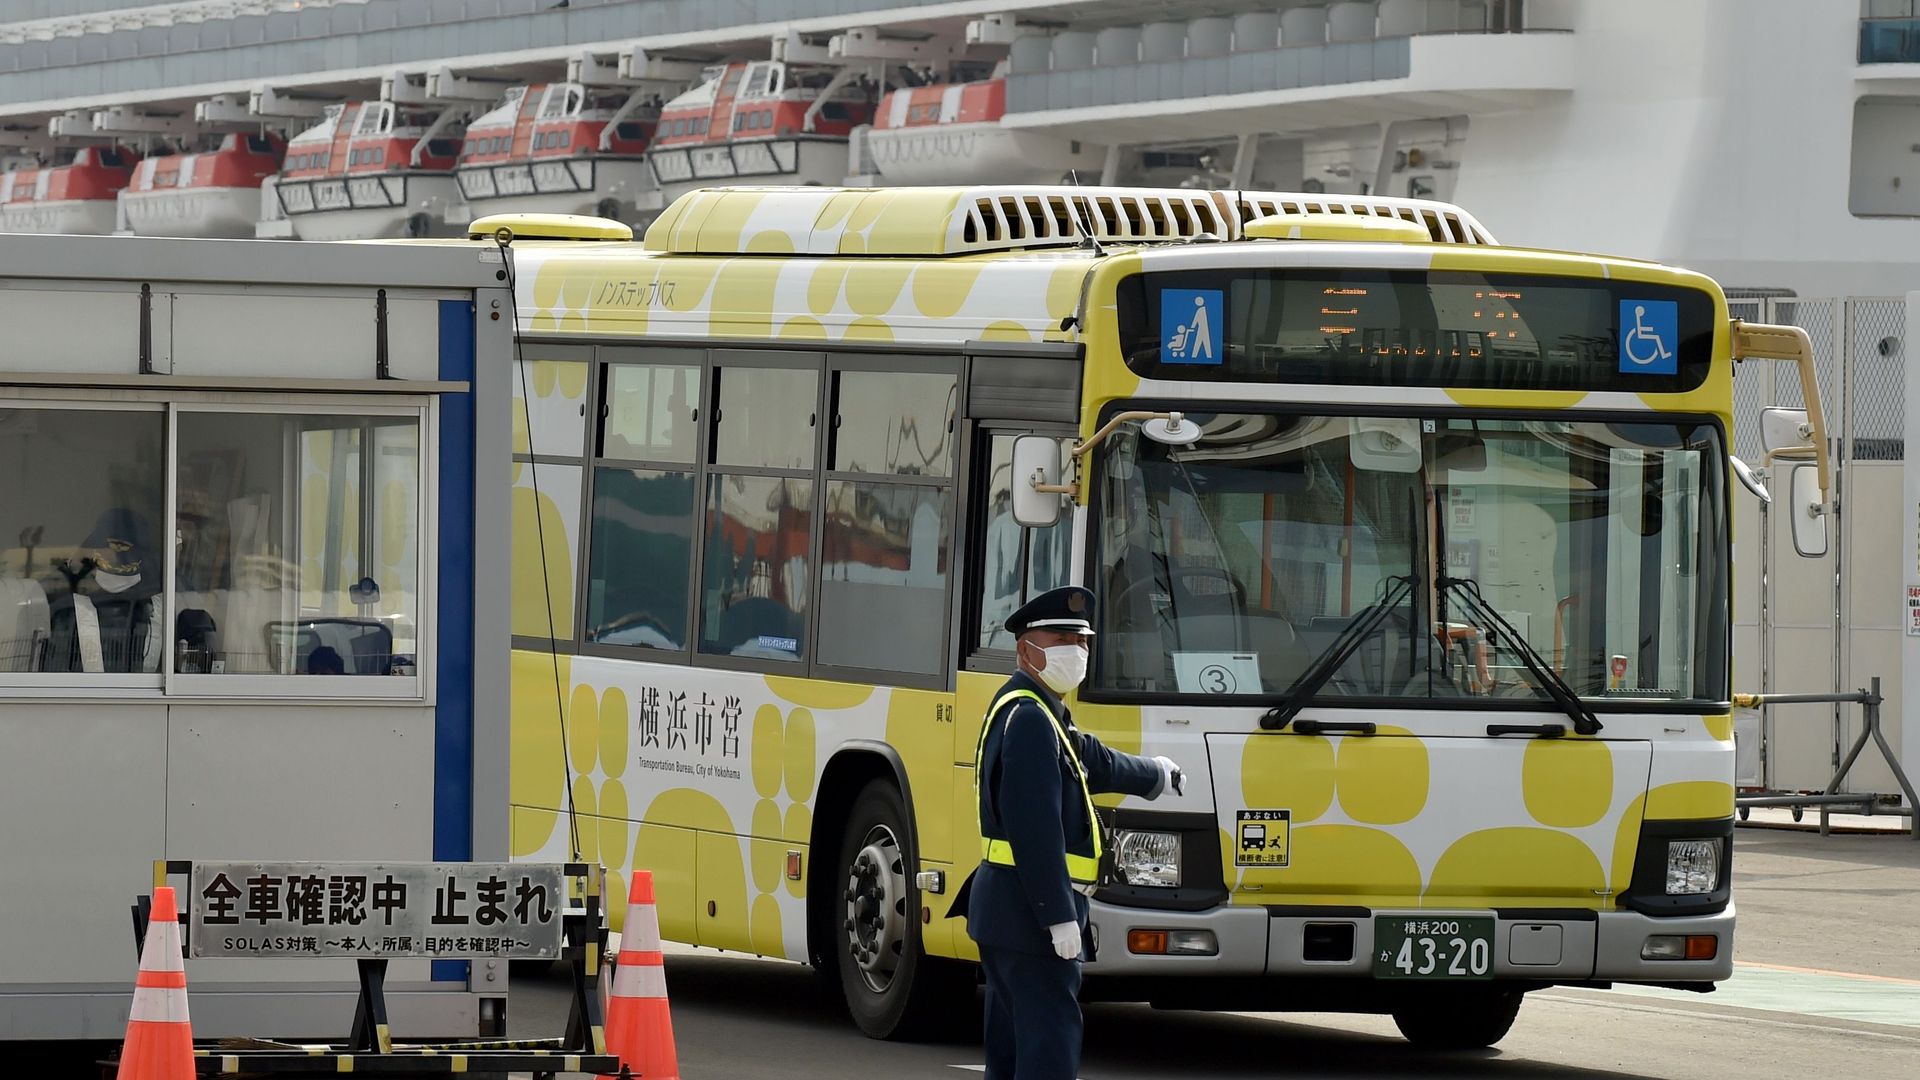 A bus carrying passengers who disembarked from the Diamond Princess cruise ship leaves the Daikoku Pier Cruise Terminal in Yokohama on February 20